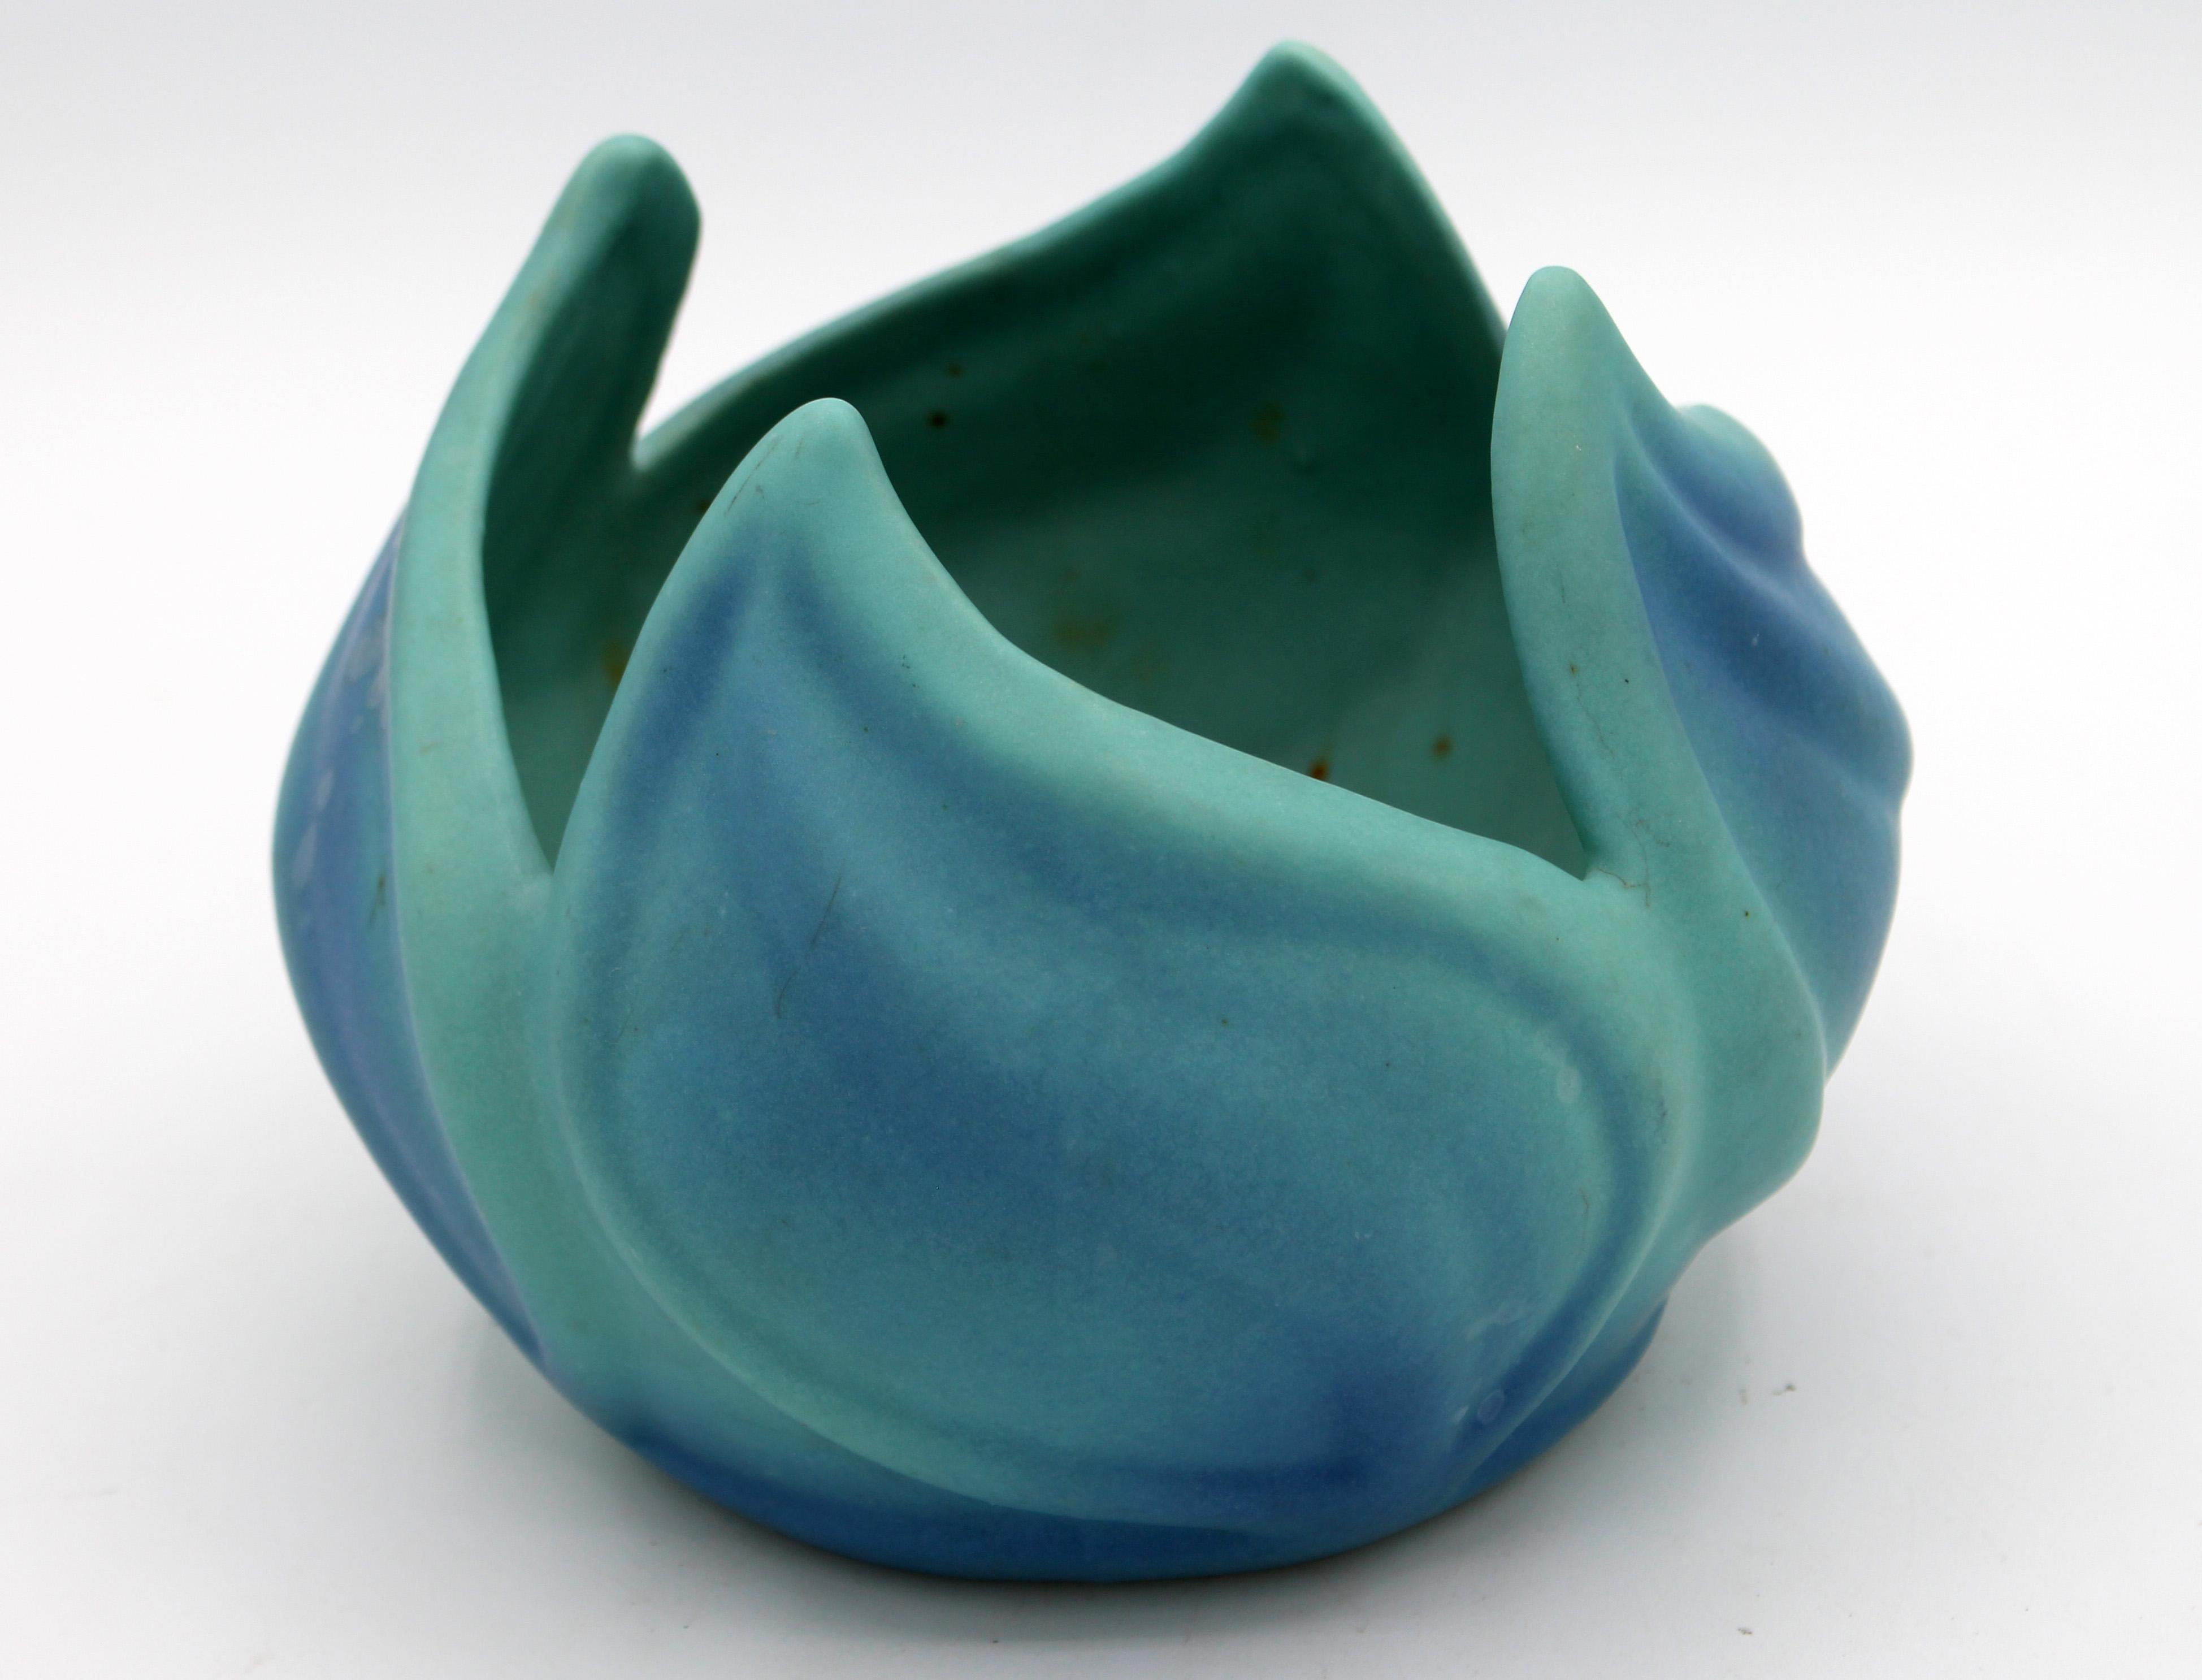 Circa 1930s Van Briggle, Colorado Springs pottery bowl. Soft blues, swirling leaves. Incision artist unknown, working in 1930s-early '40s (note the 